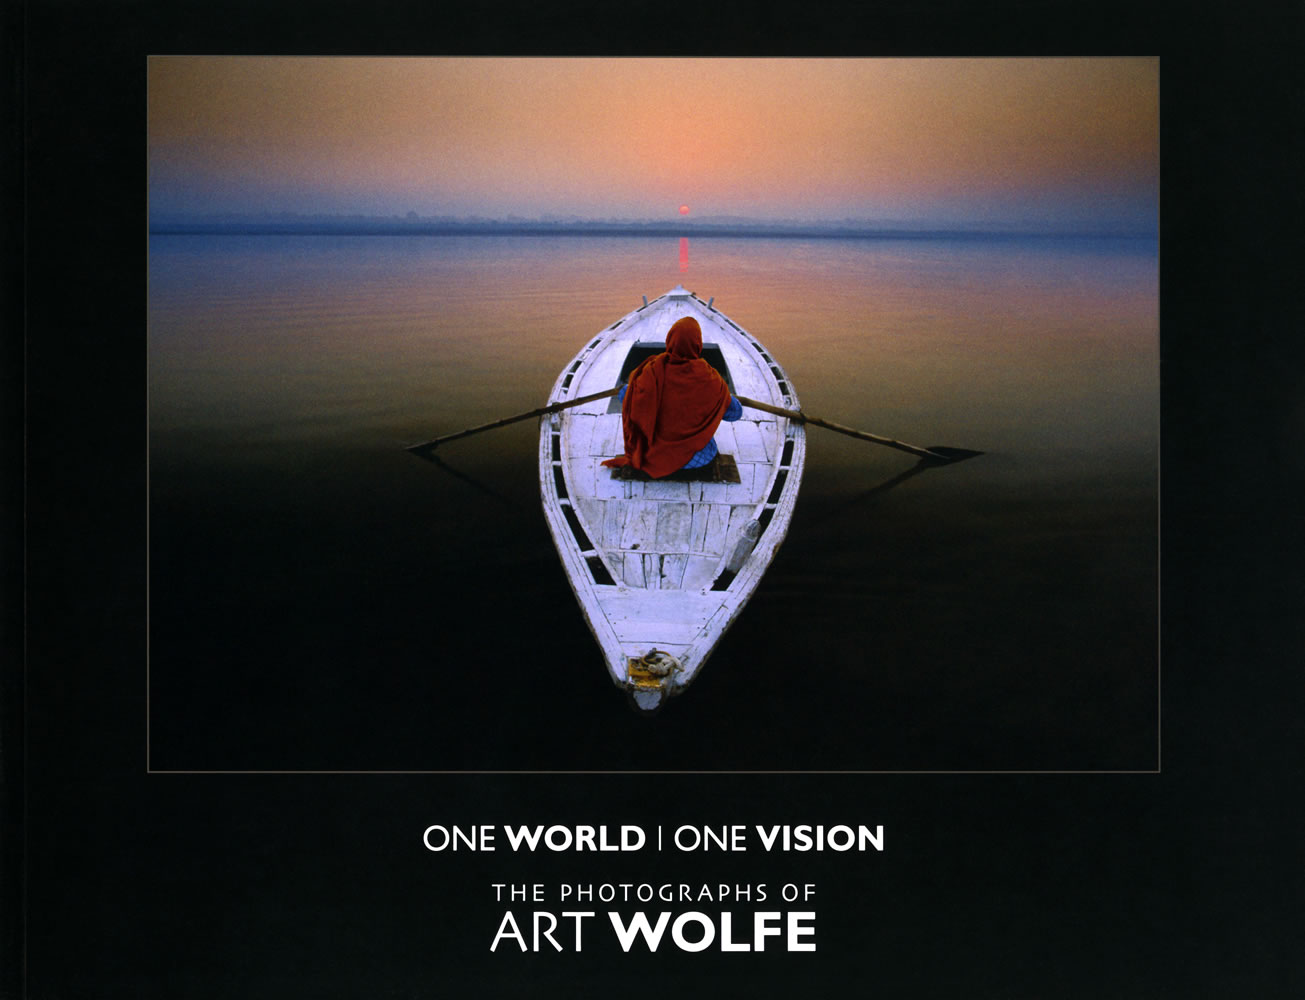 One World, One Vision